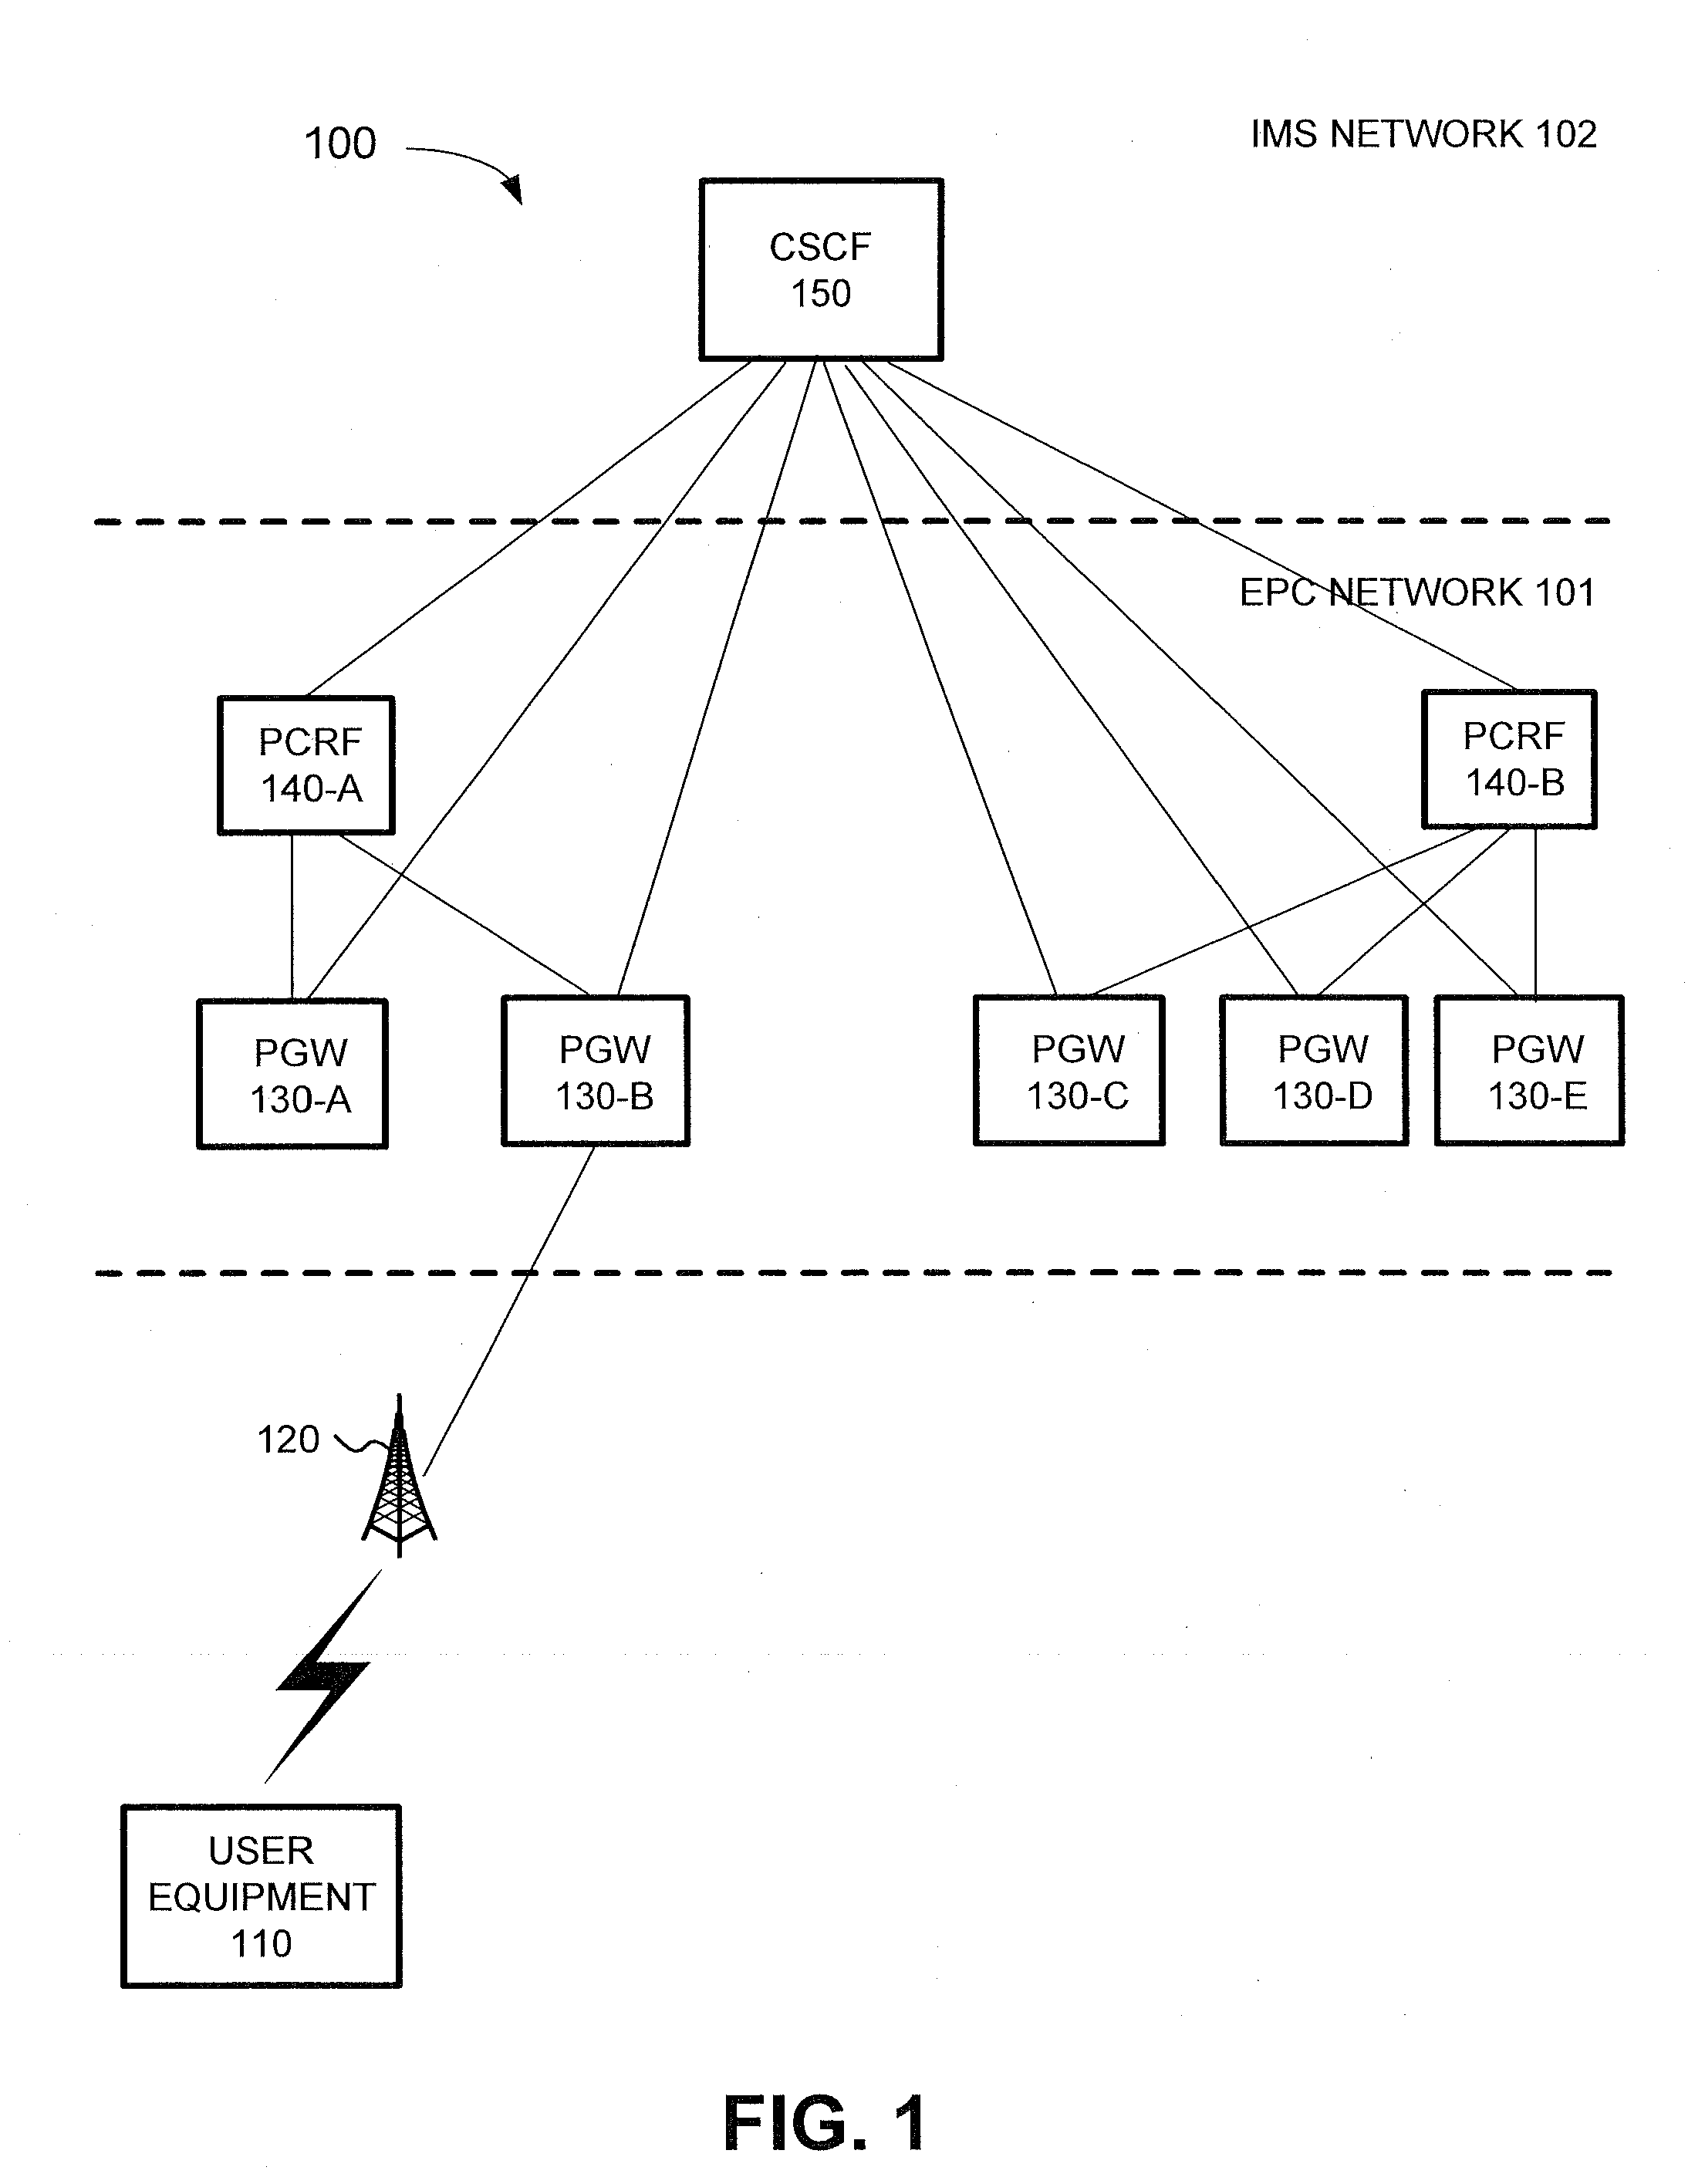 Selection of a policy and charging rules function device